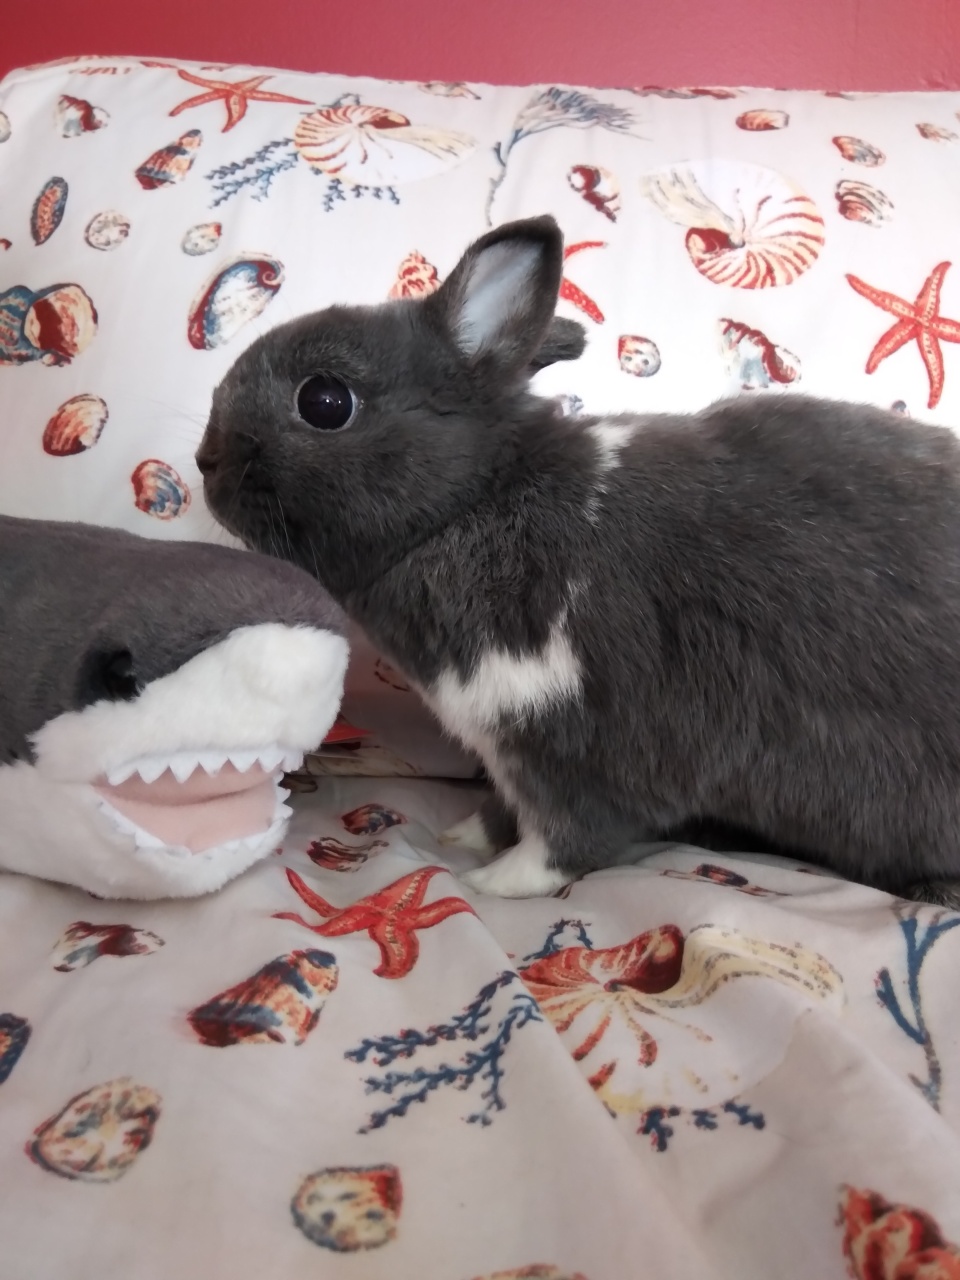 Tiny Bean and William Sharkspeare